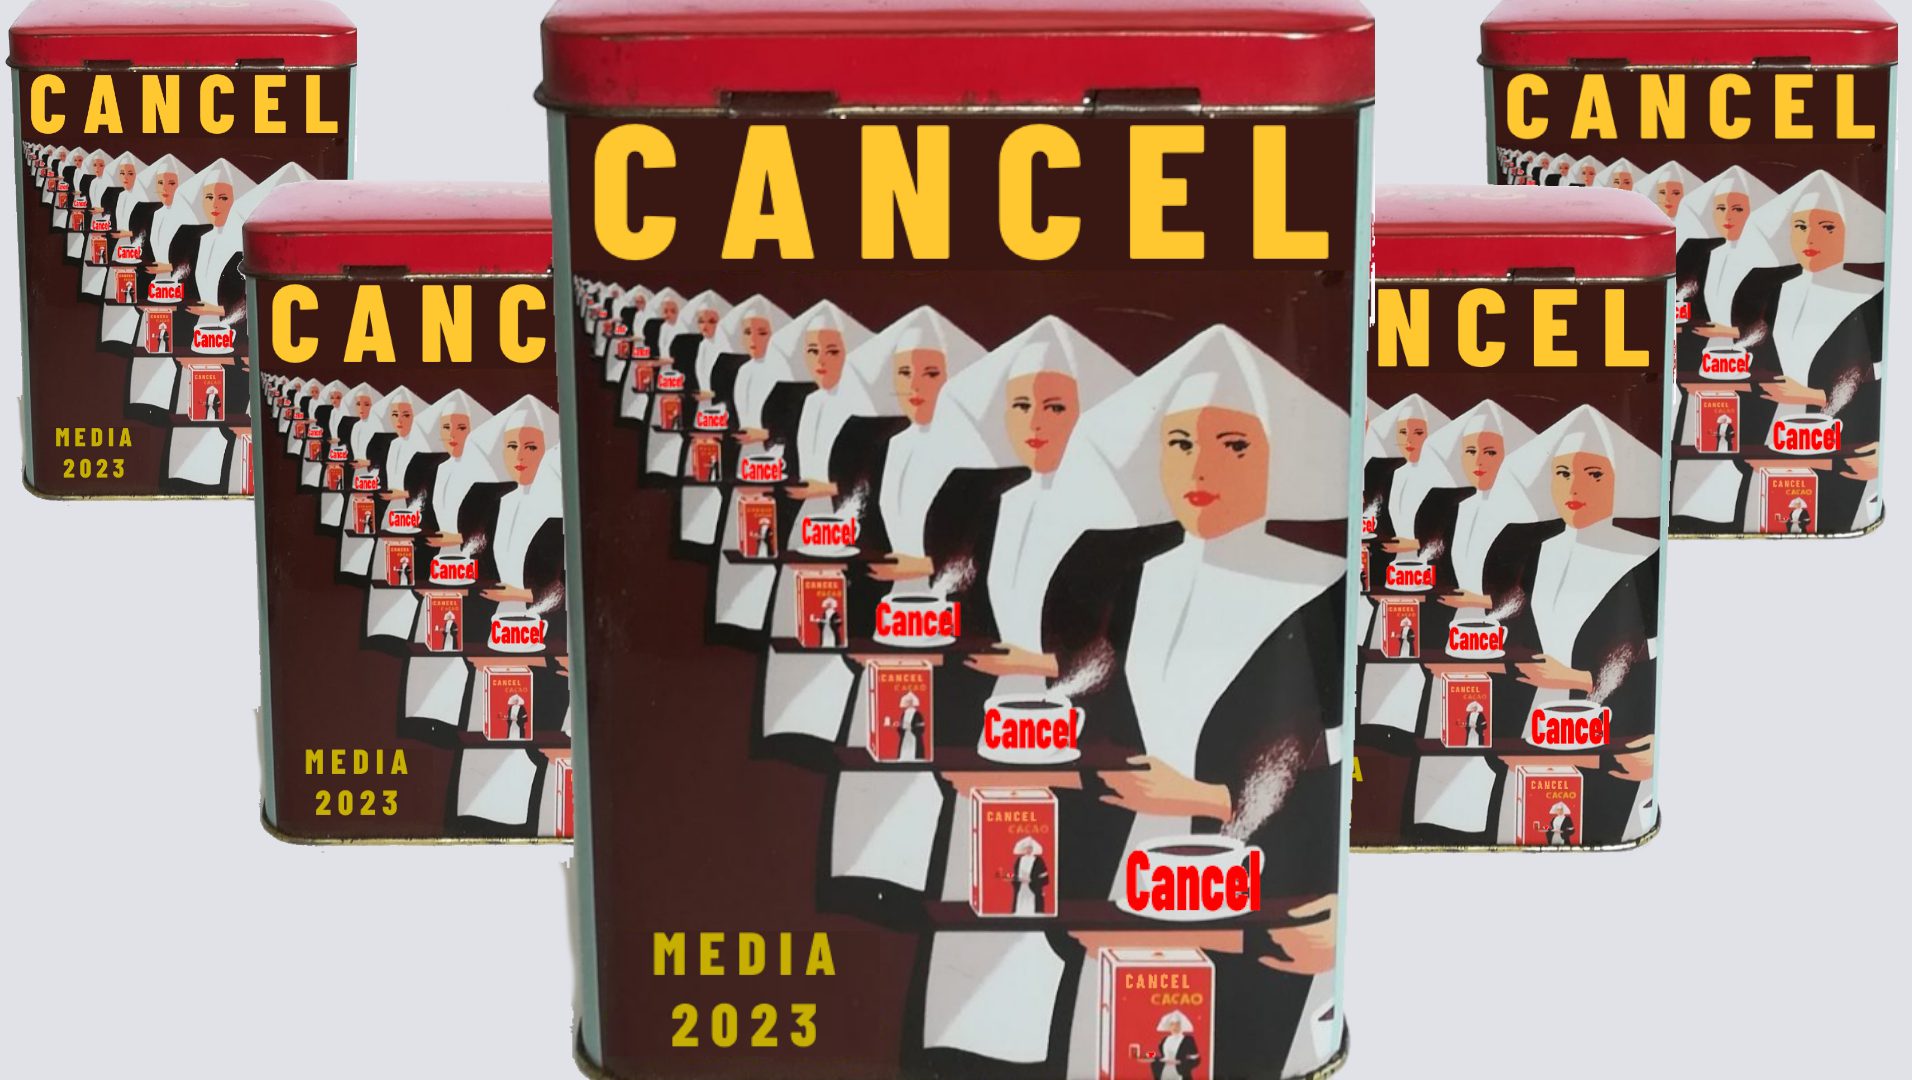 A documentary about cancellation culture, The Droste Effect, has been cancelled